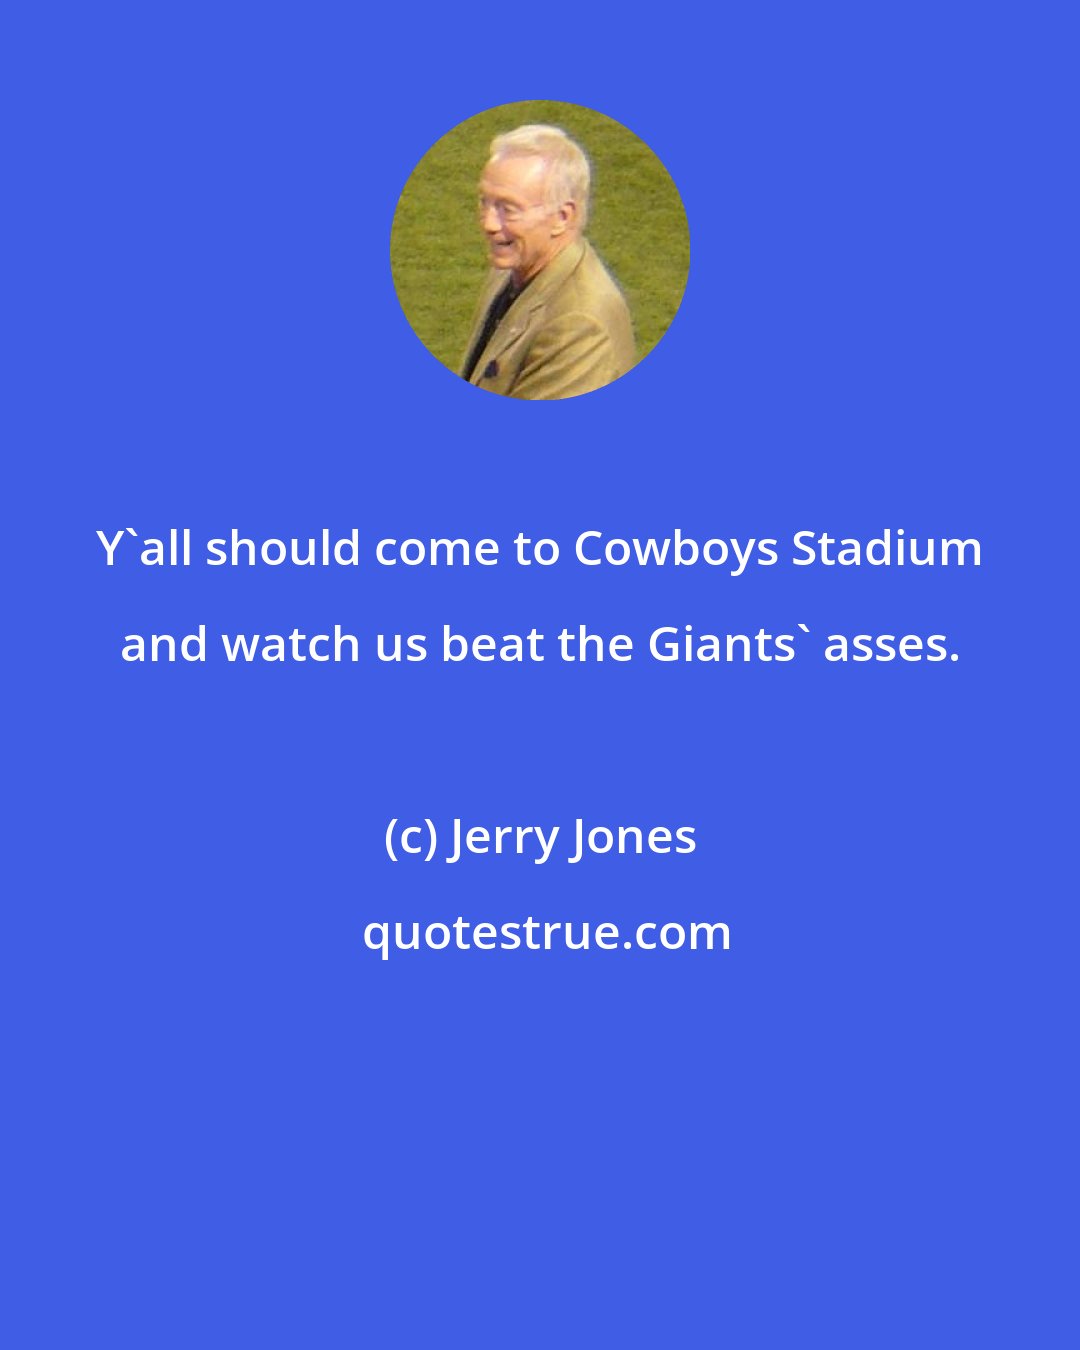 Jerry Jones: Y'all should come to Cowboys Stadium and watch us beat the Giants' asses.